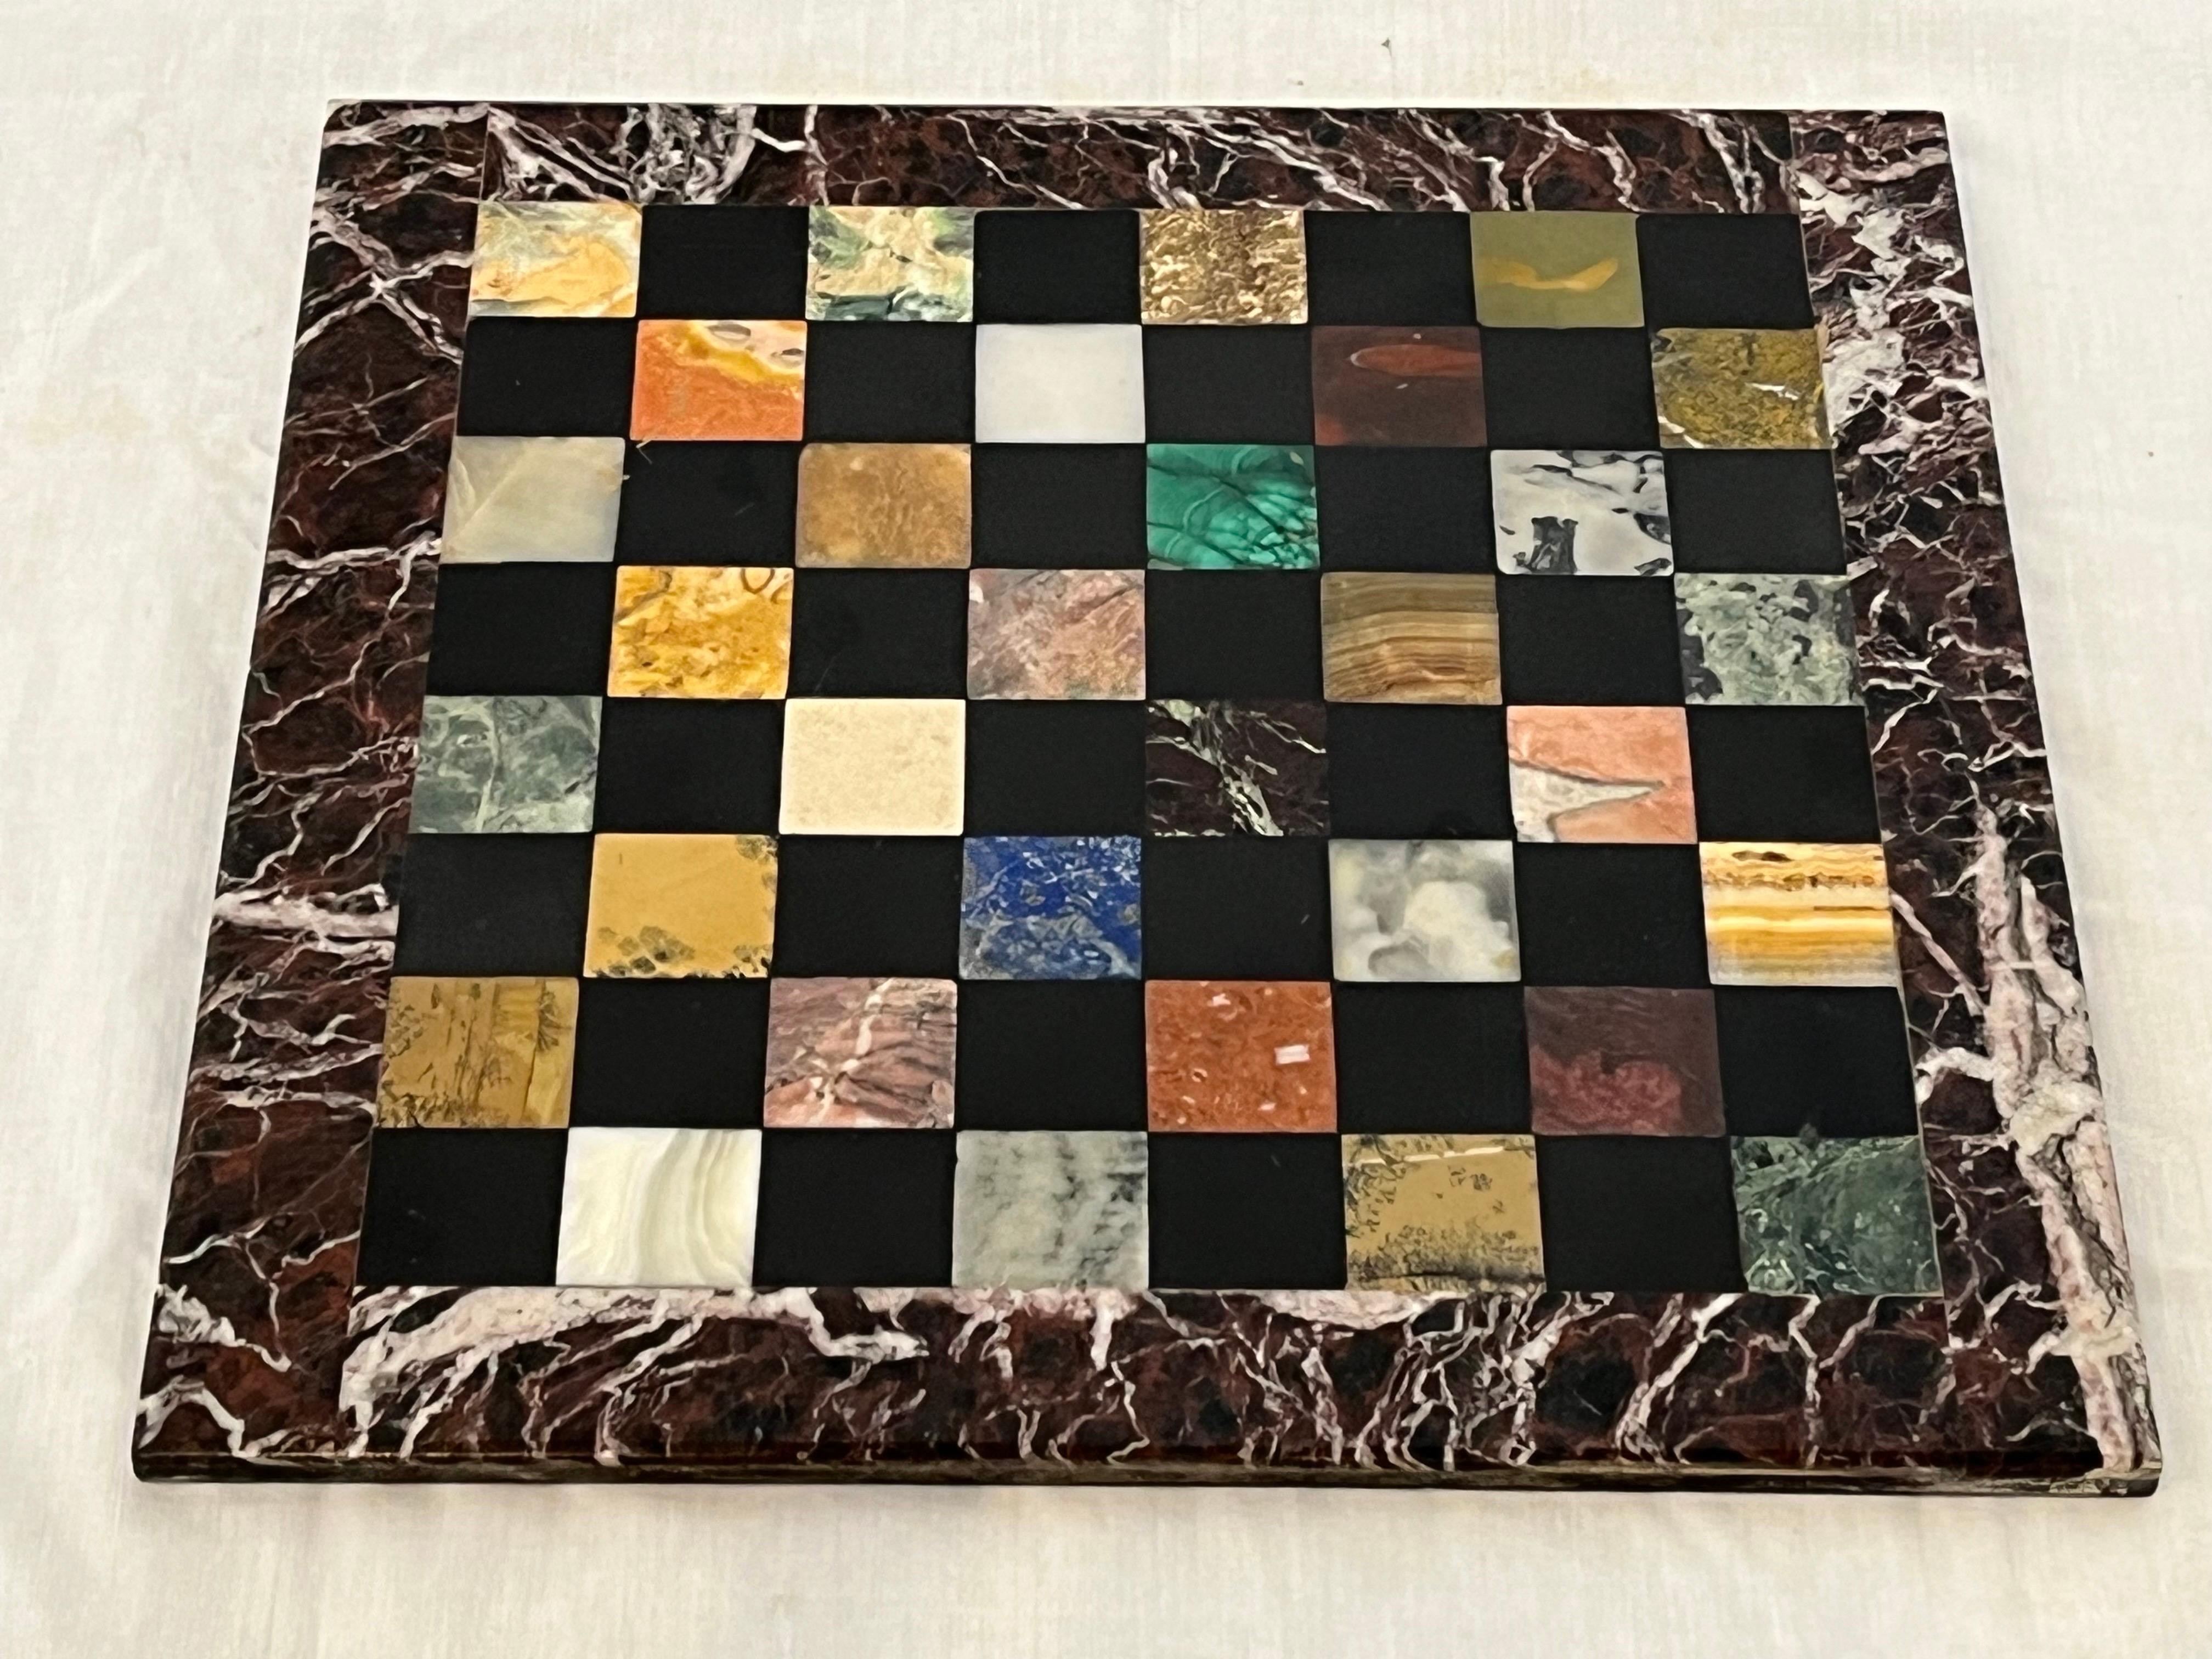 It's your move on this perfect mid century Italian specimen marble pietra dura style chess board from Florence. Il Mosaico di Firenze was a well known maker of incredible pietra dura artworks, this chess board is part of that impressive legacy. The